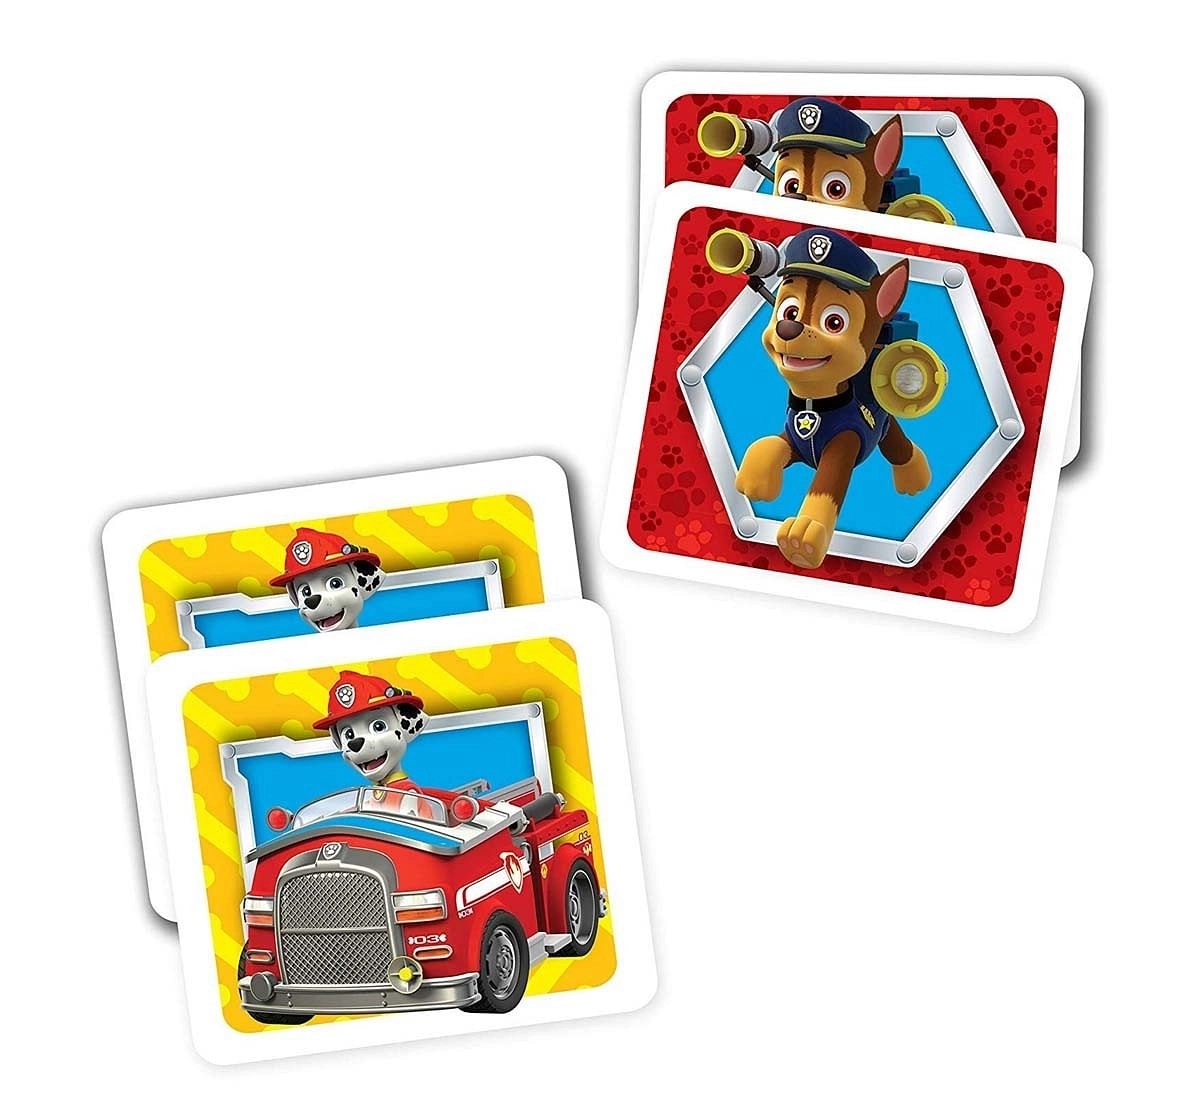 Cardinal Paw Patrol Memory Match 72 Cards Board Games for Kids age 3Y+ 